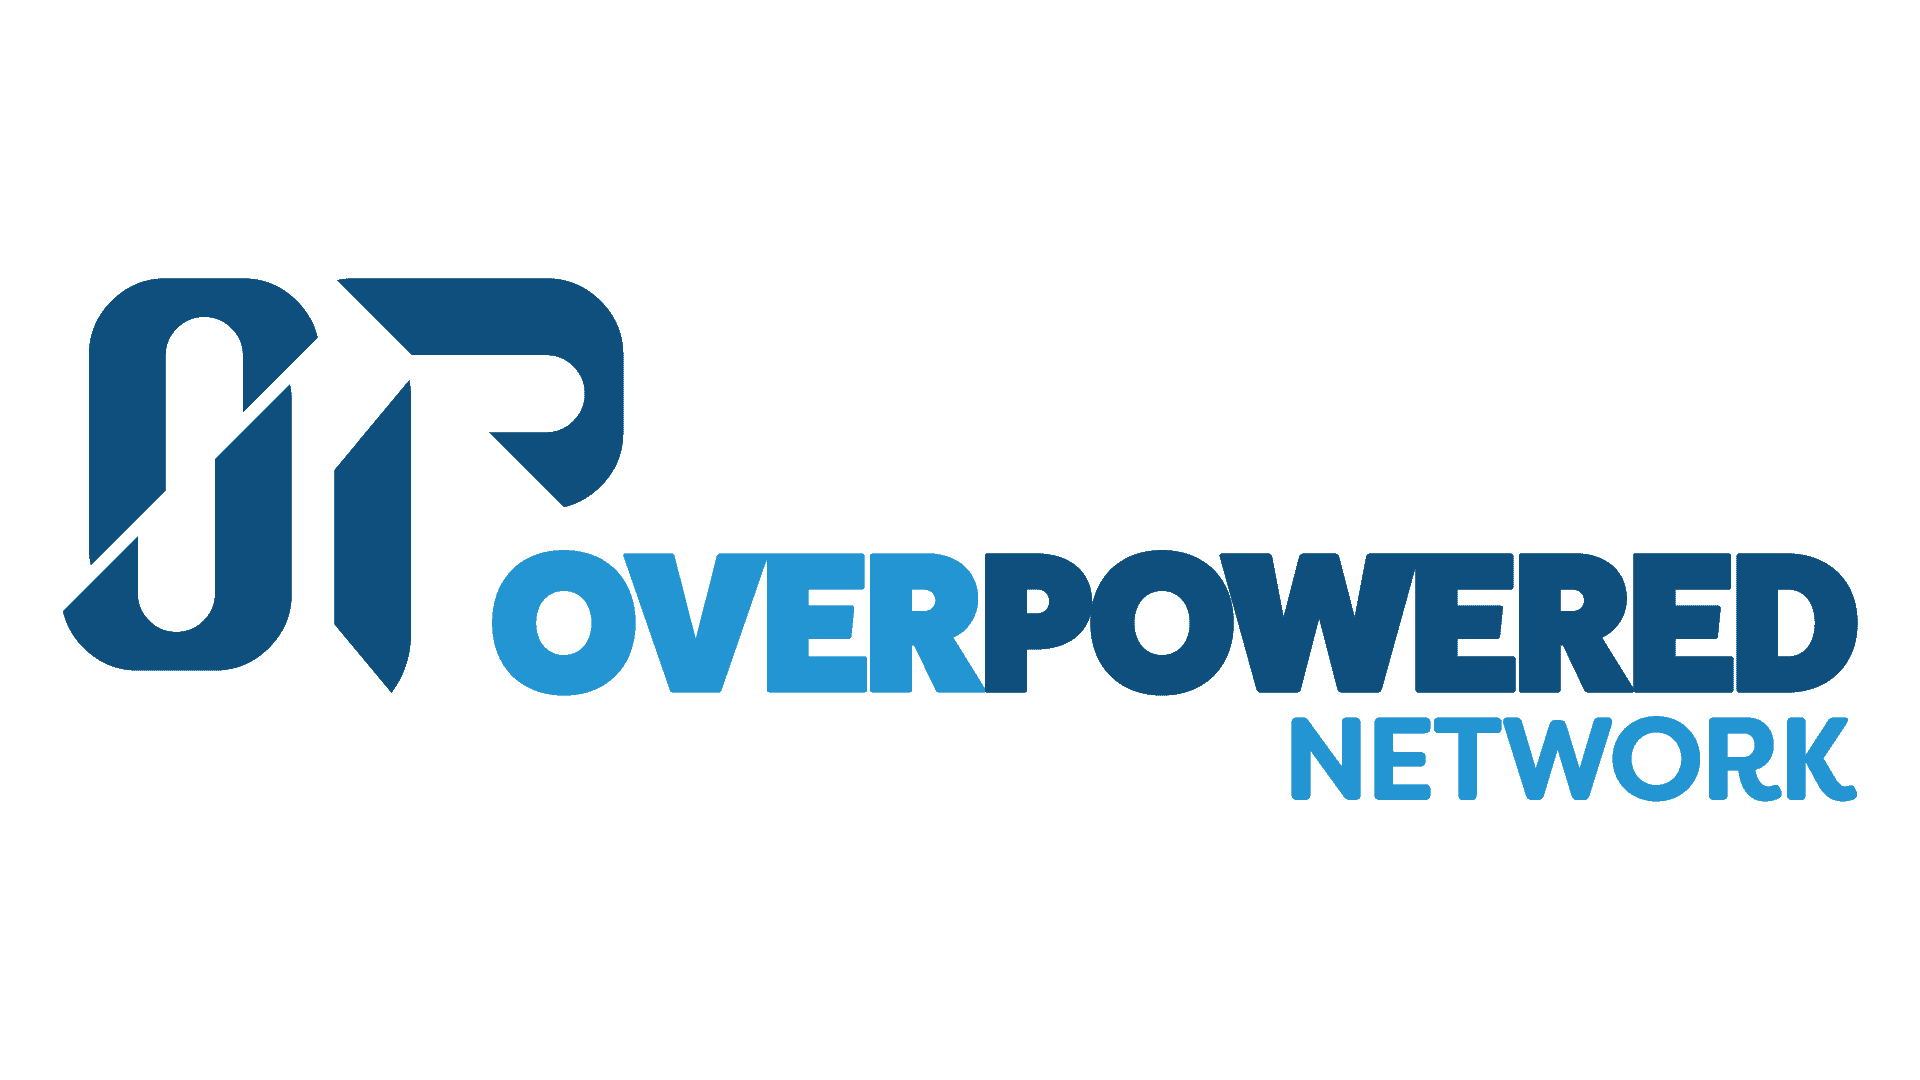 Overpowernetwork